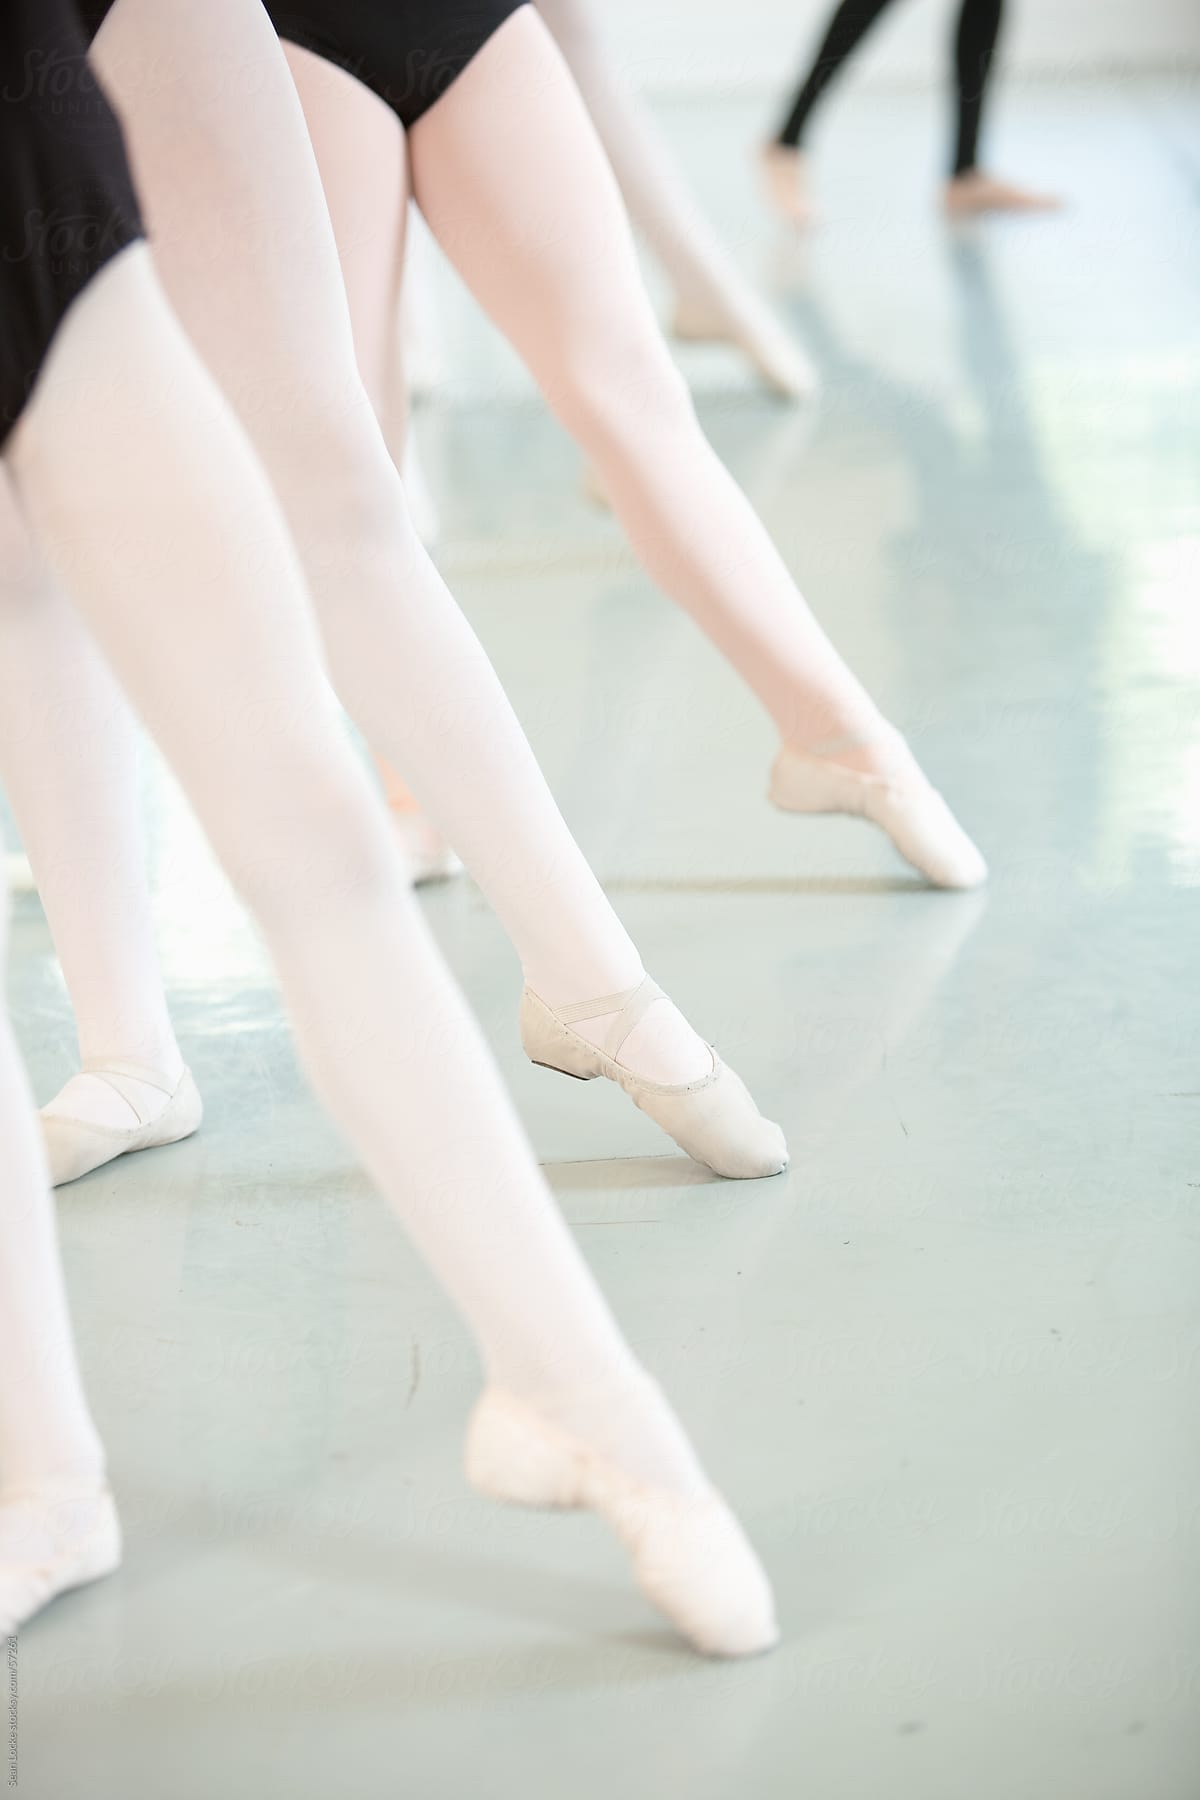 Ballet: Students Stretching Legs in Class